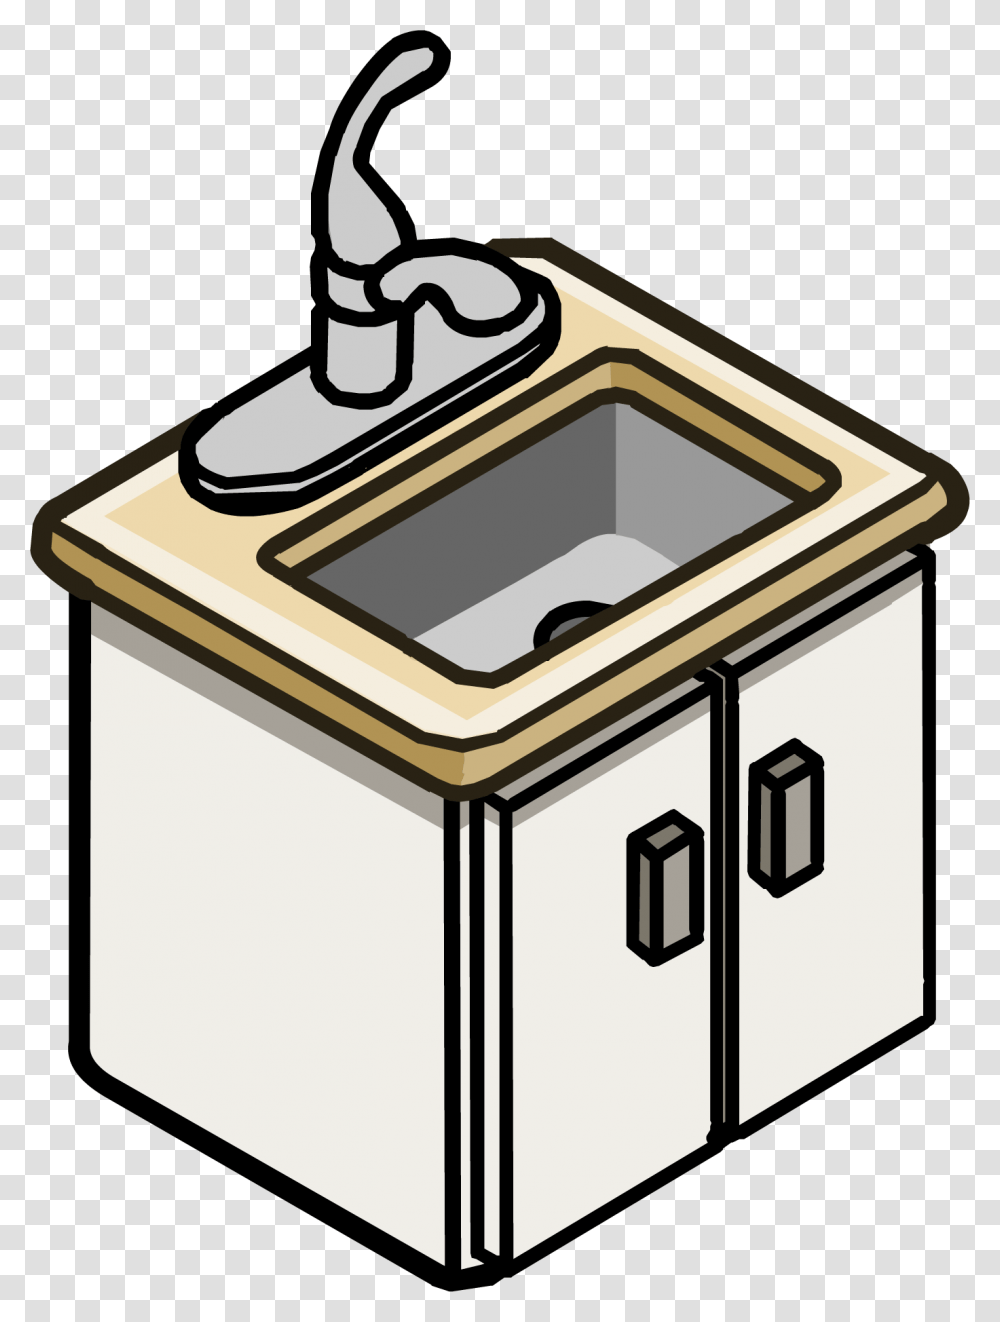 Furniture Items Kitchen Sink, Appliance, Oven, Mailbox, Letterbox Transparent Png